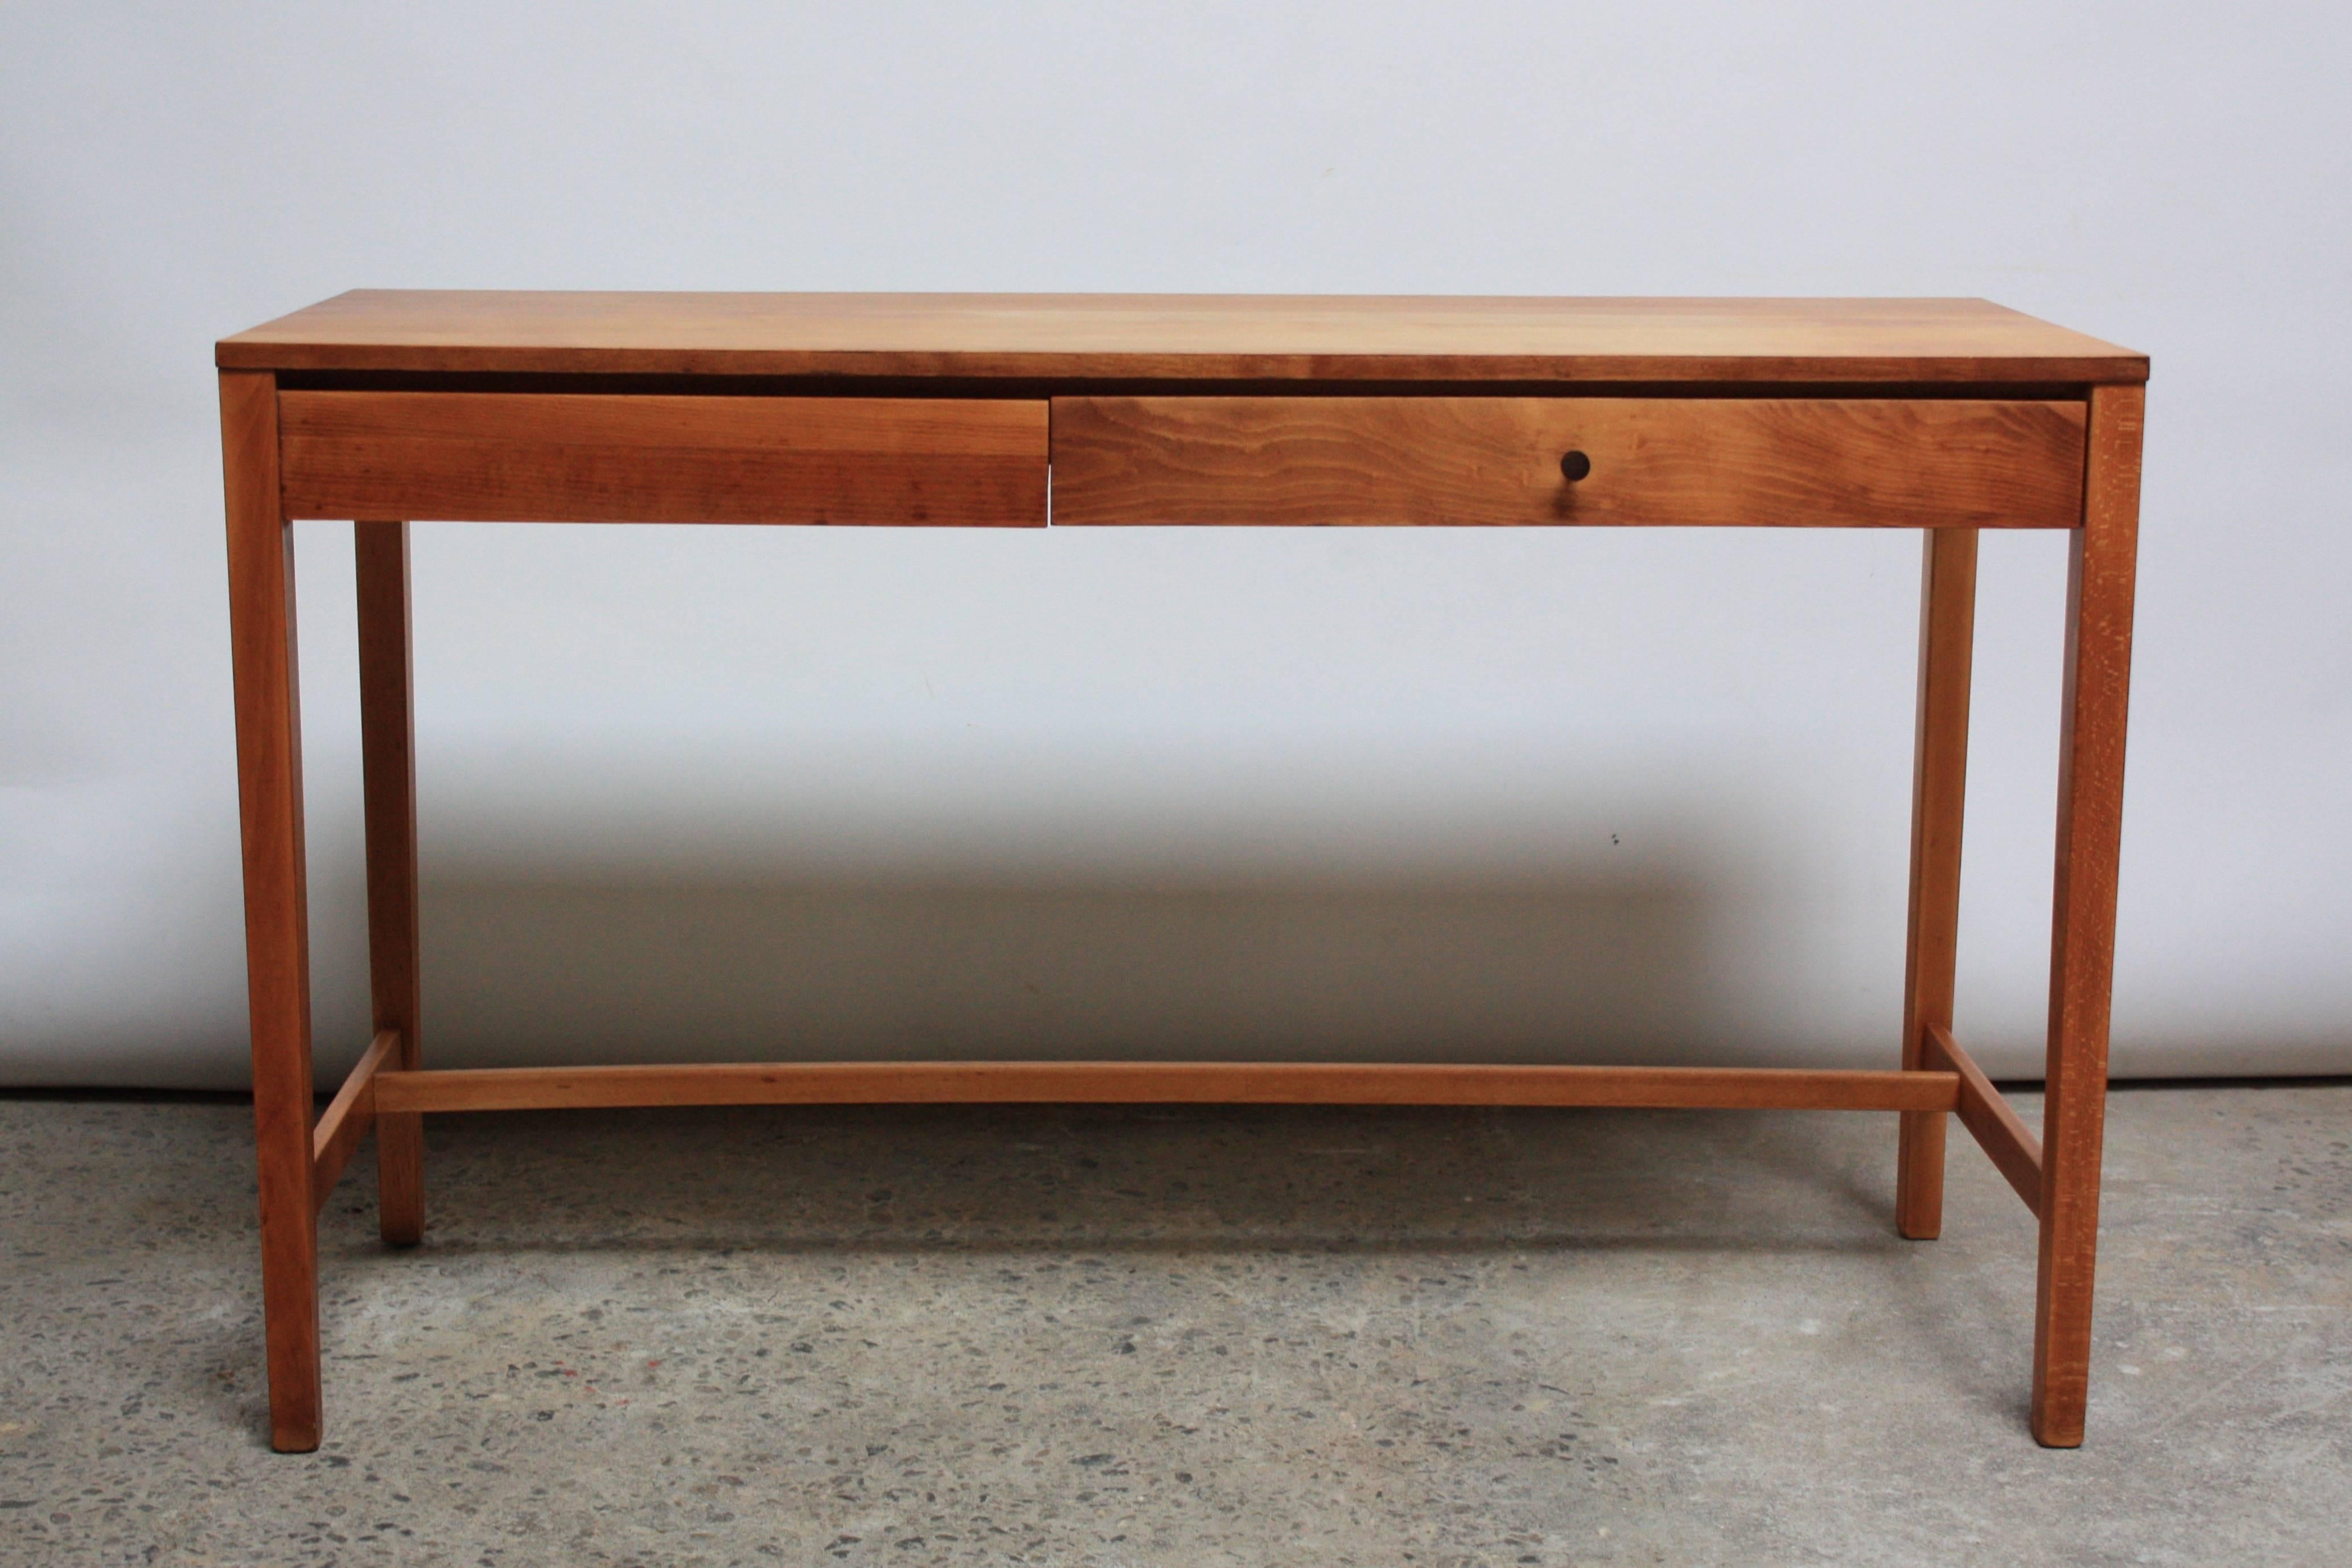 This elegant, minimal writing desk was designed by Paul Mccobb for Winchedon Furniture for the Perimeter Group Line. The maple is subtly offset by a rosewood pull for the single drawer. 